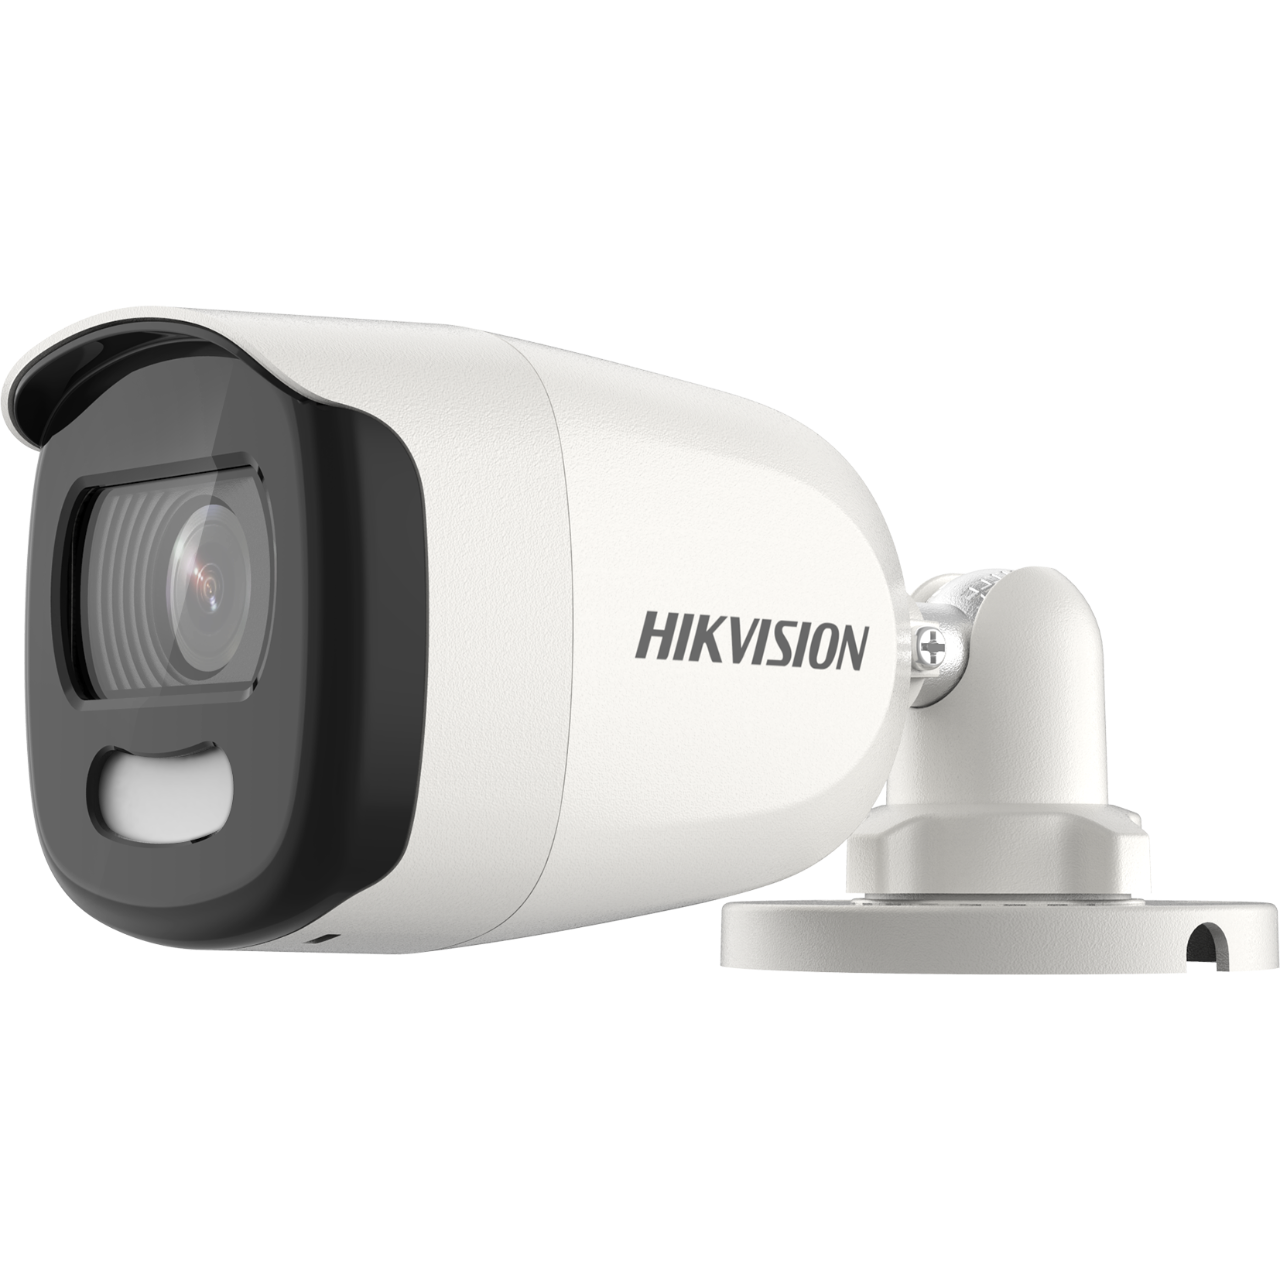 Hikvision 5MP ColorVu 20m Bullet Analog Outdoor Camera - DS-2CE10HFT-F